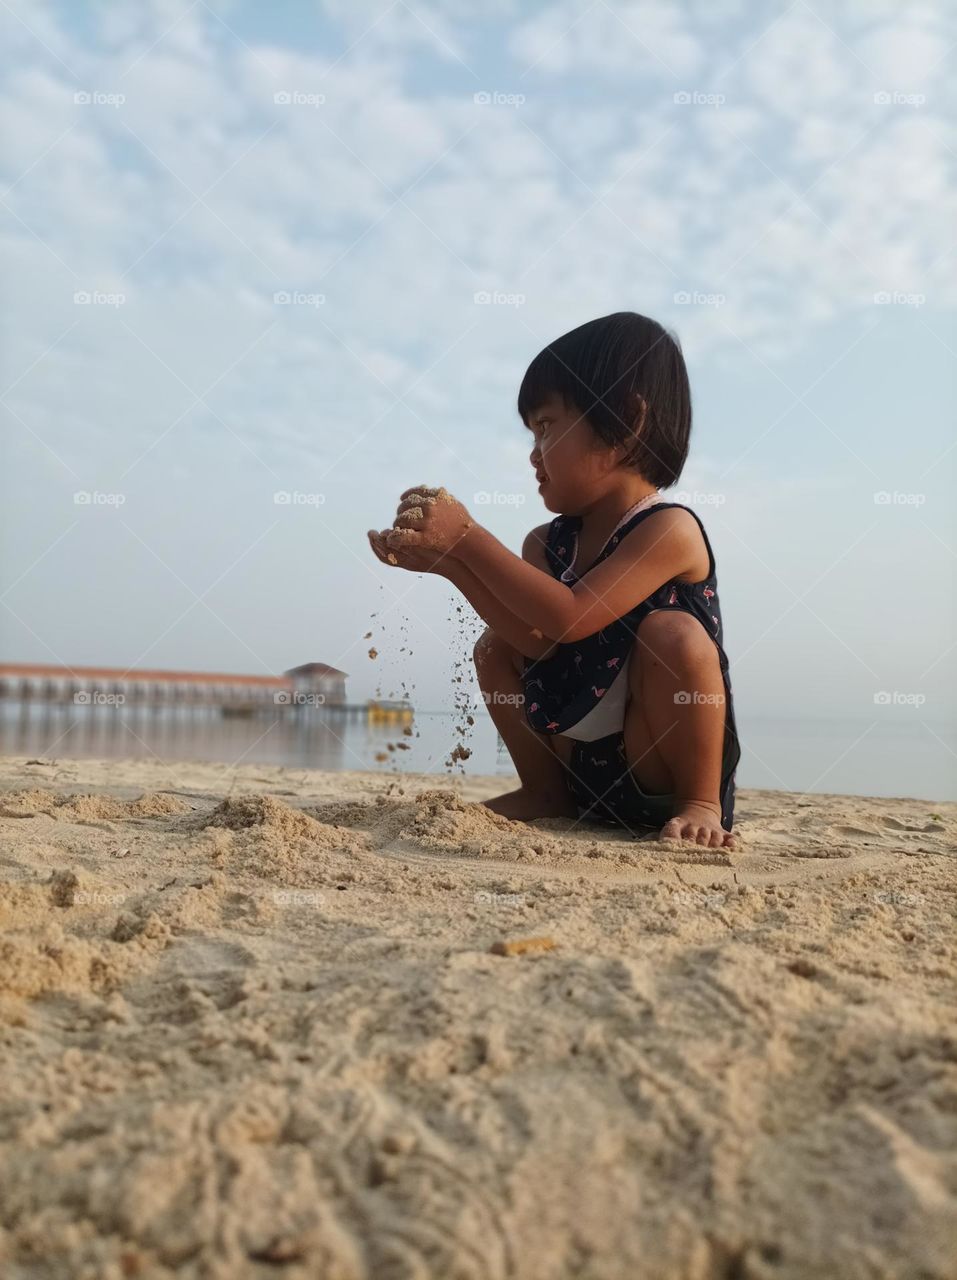 in the crispy morning, a beautiful little girl playing sand